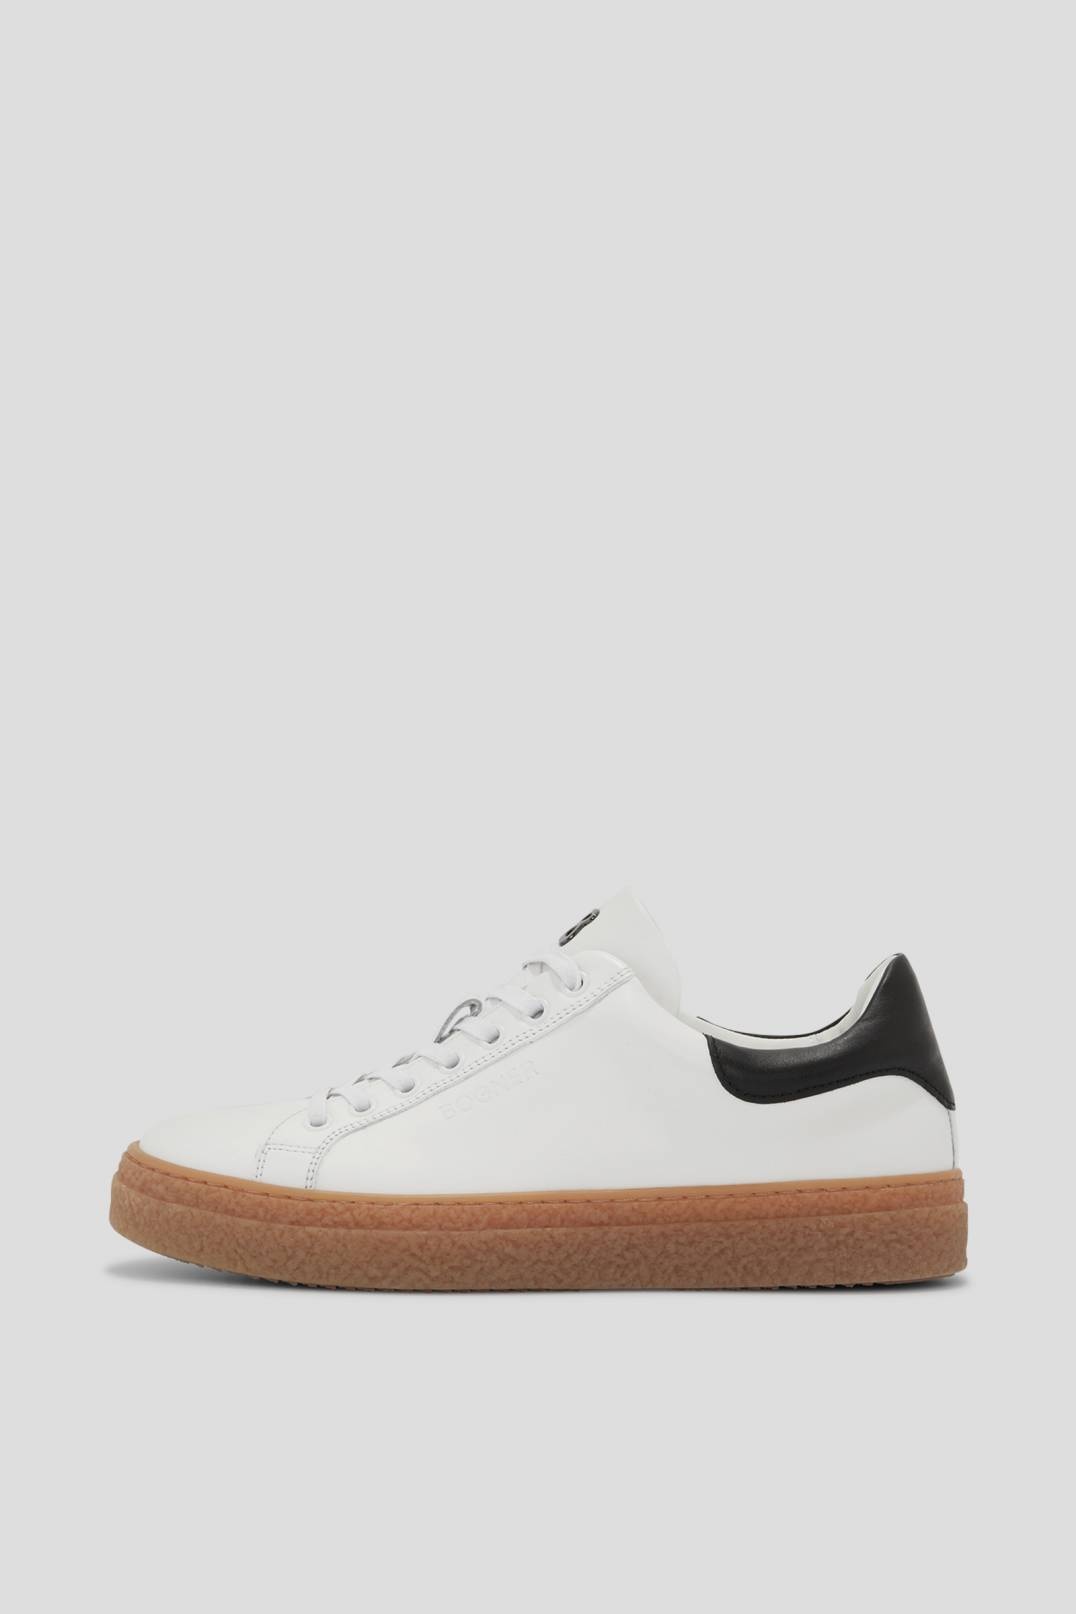 CLEVELAND SNEAKERS IN WHITE/BROWN - 1